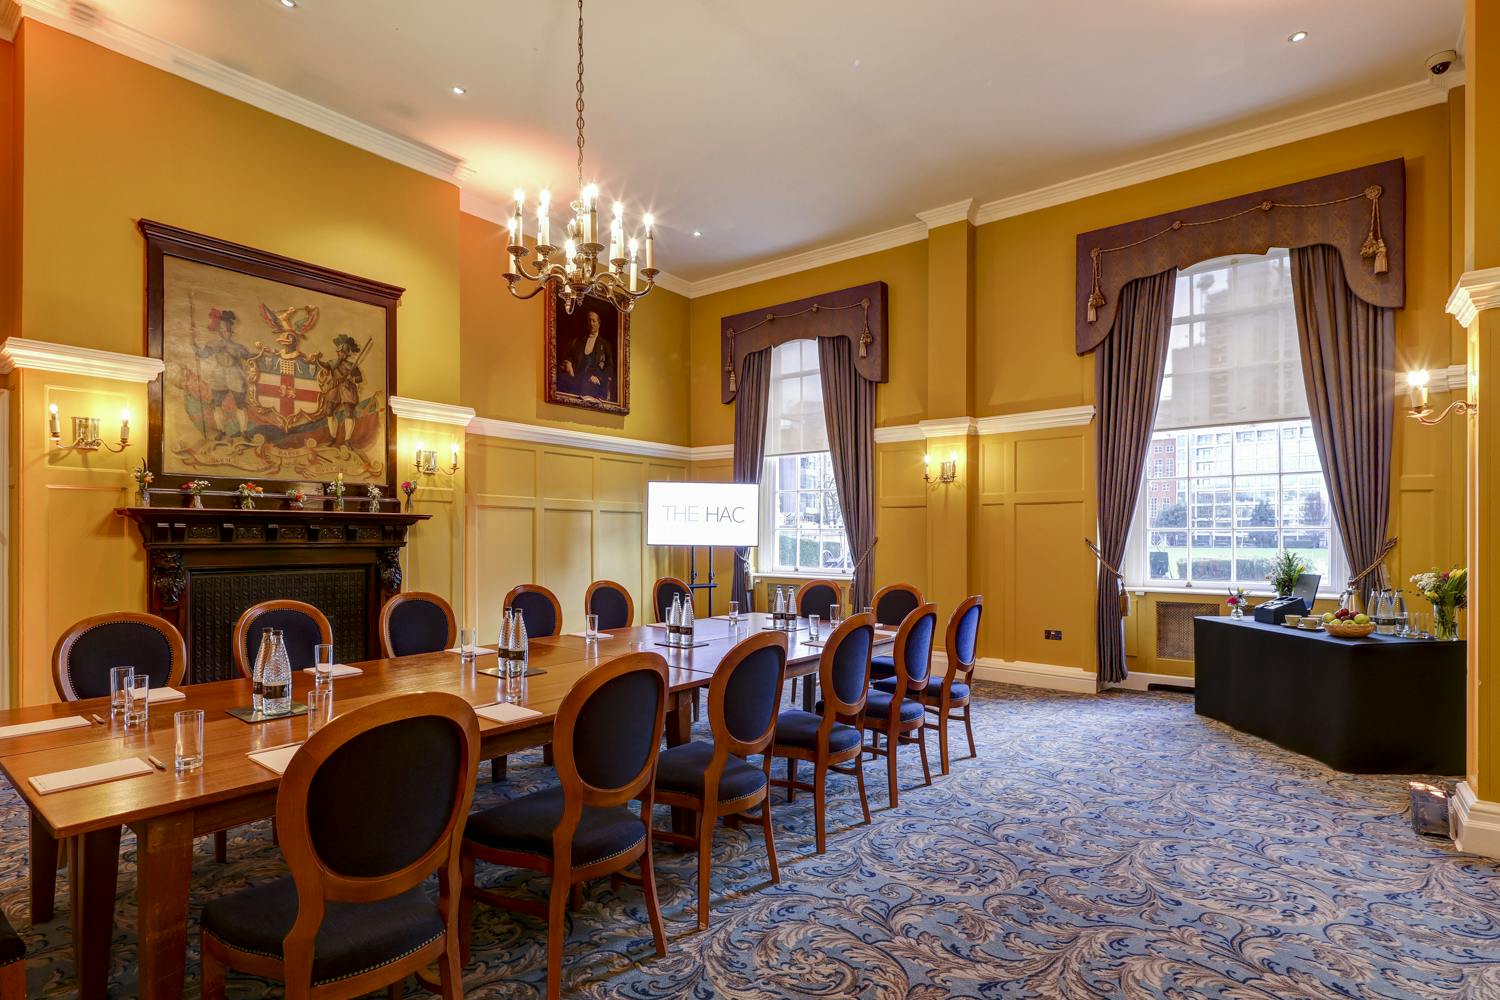 5 Quirky London Meeting Rooms to Inspire Creative Thinking